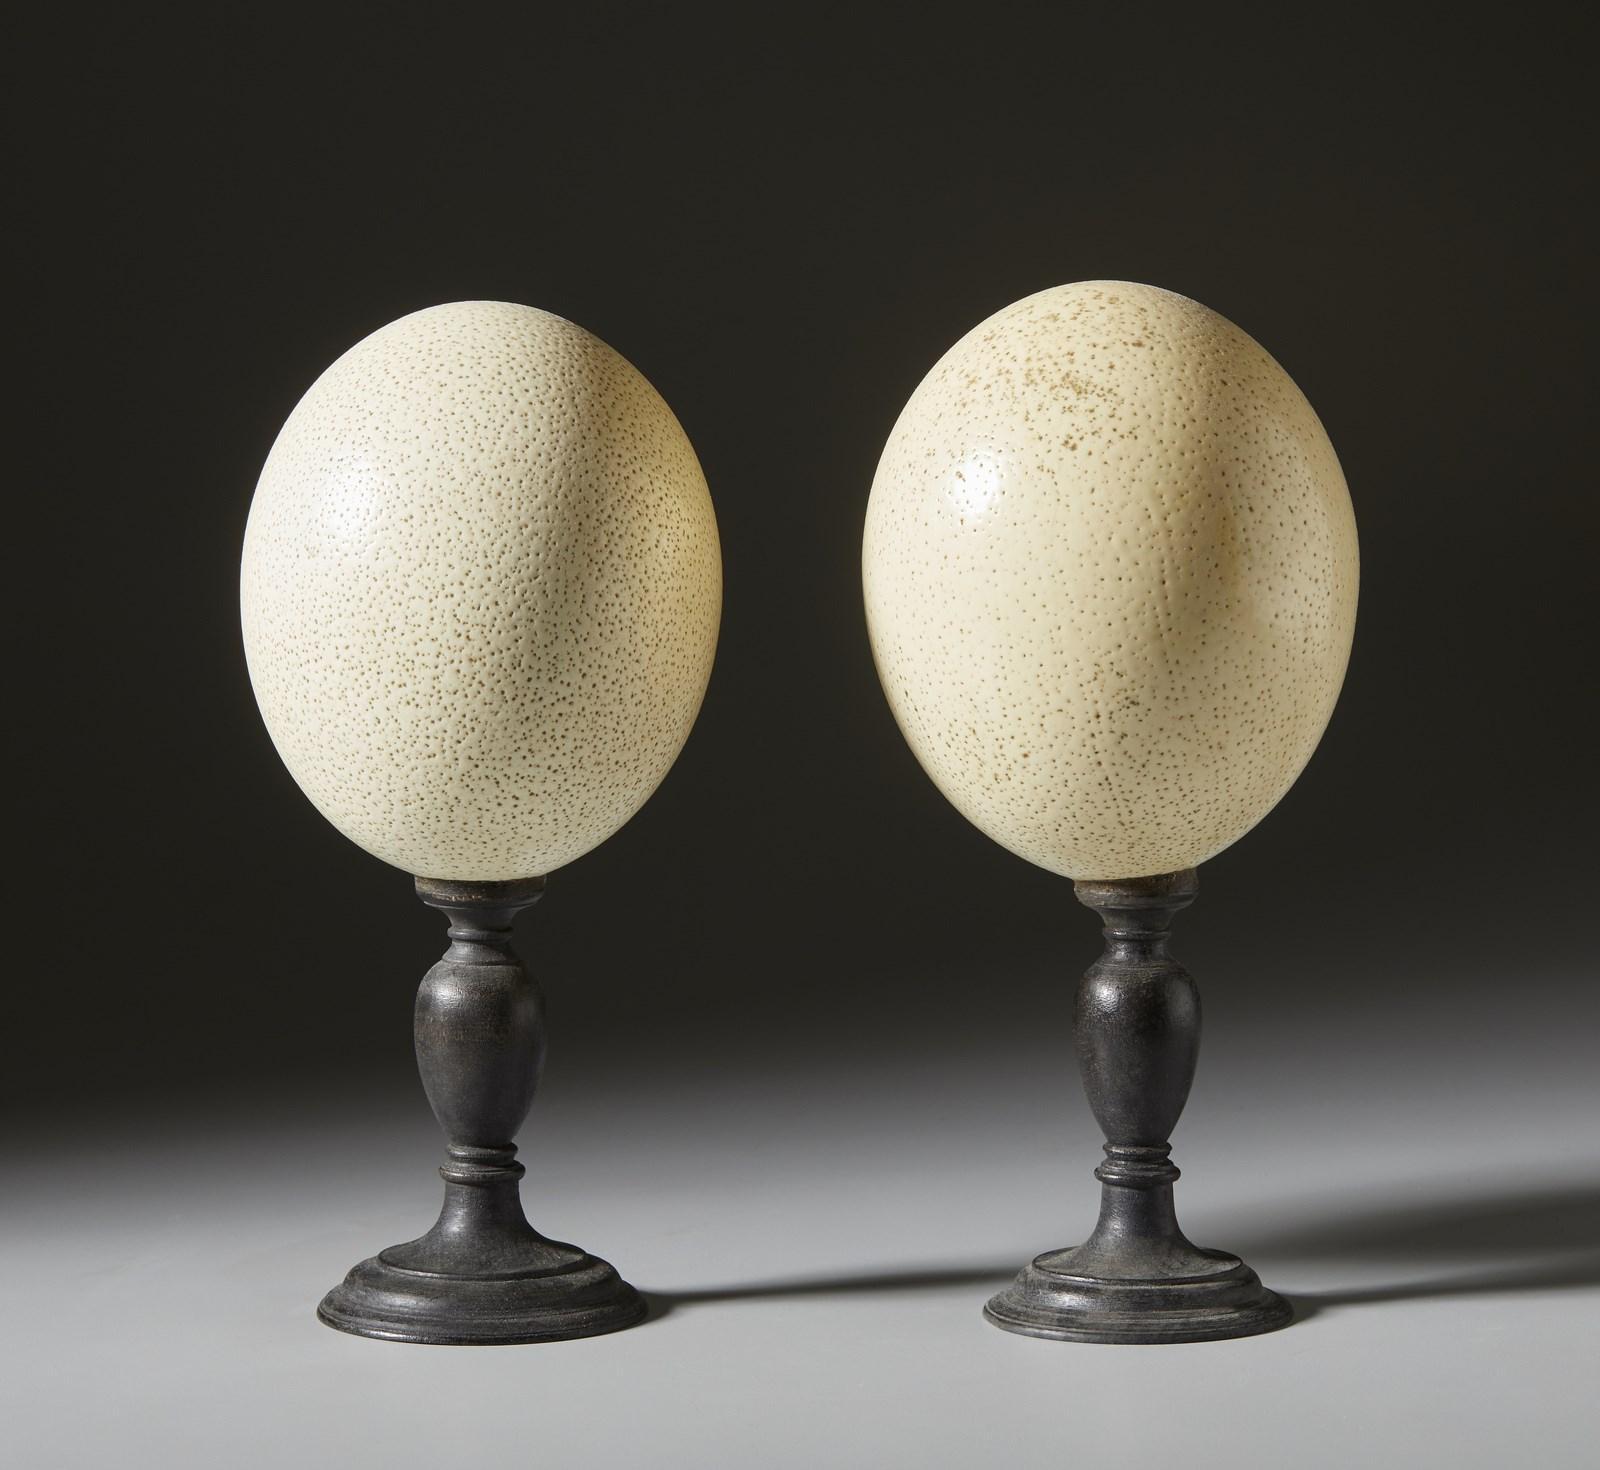 A superb pair of mounted ostrich eggs.

During the German Renaissance, Kunstkammer or Wonder Cabinet objects transformed ostrich eggs into ornate flasks, urns and decorative works. In ancient times engraved ostrich eggs were prized treasures.